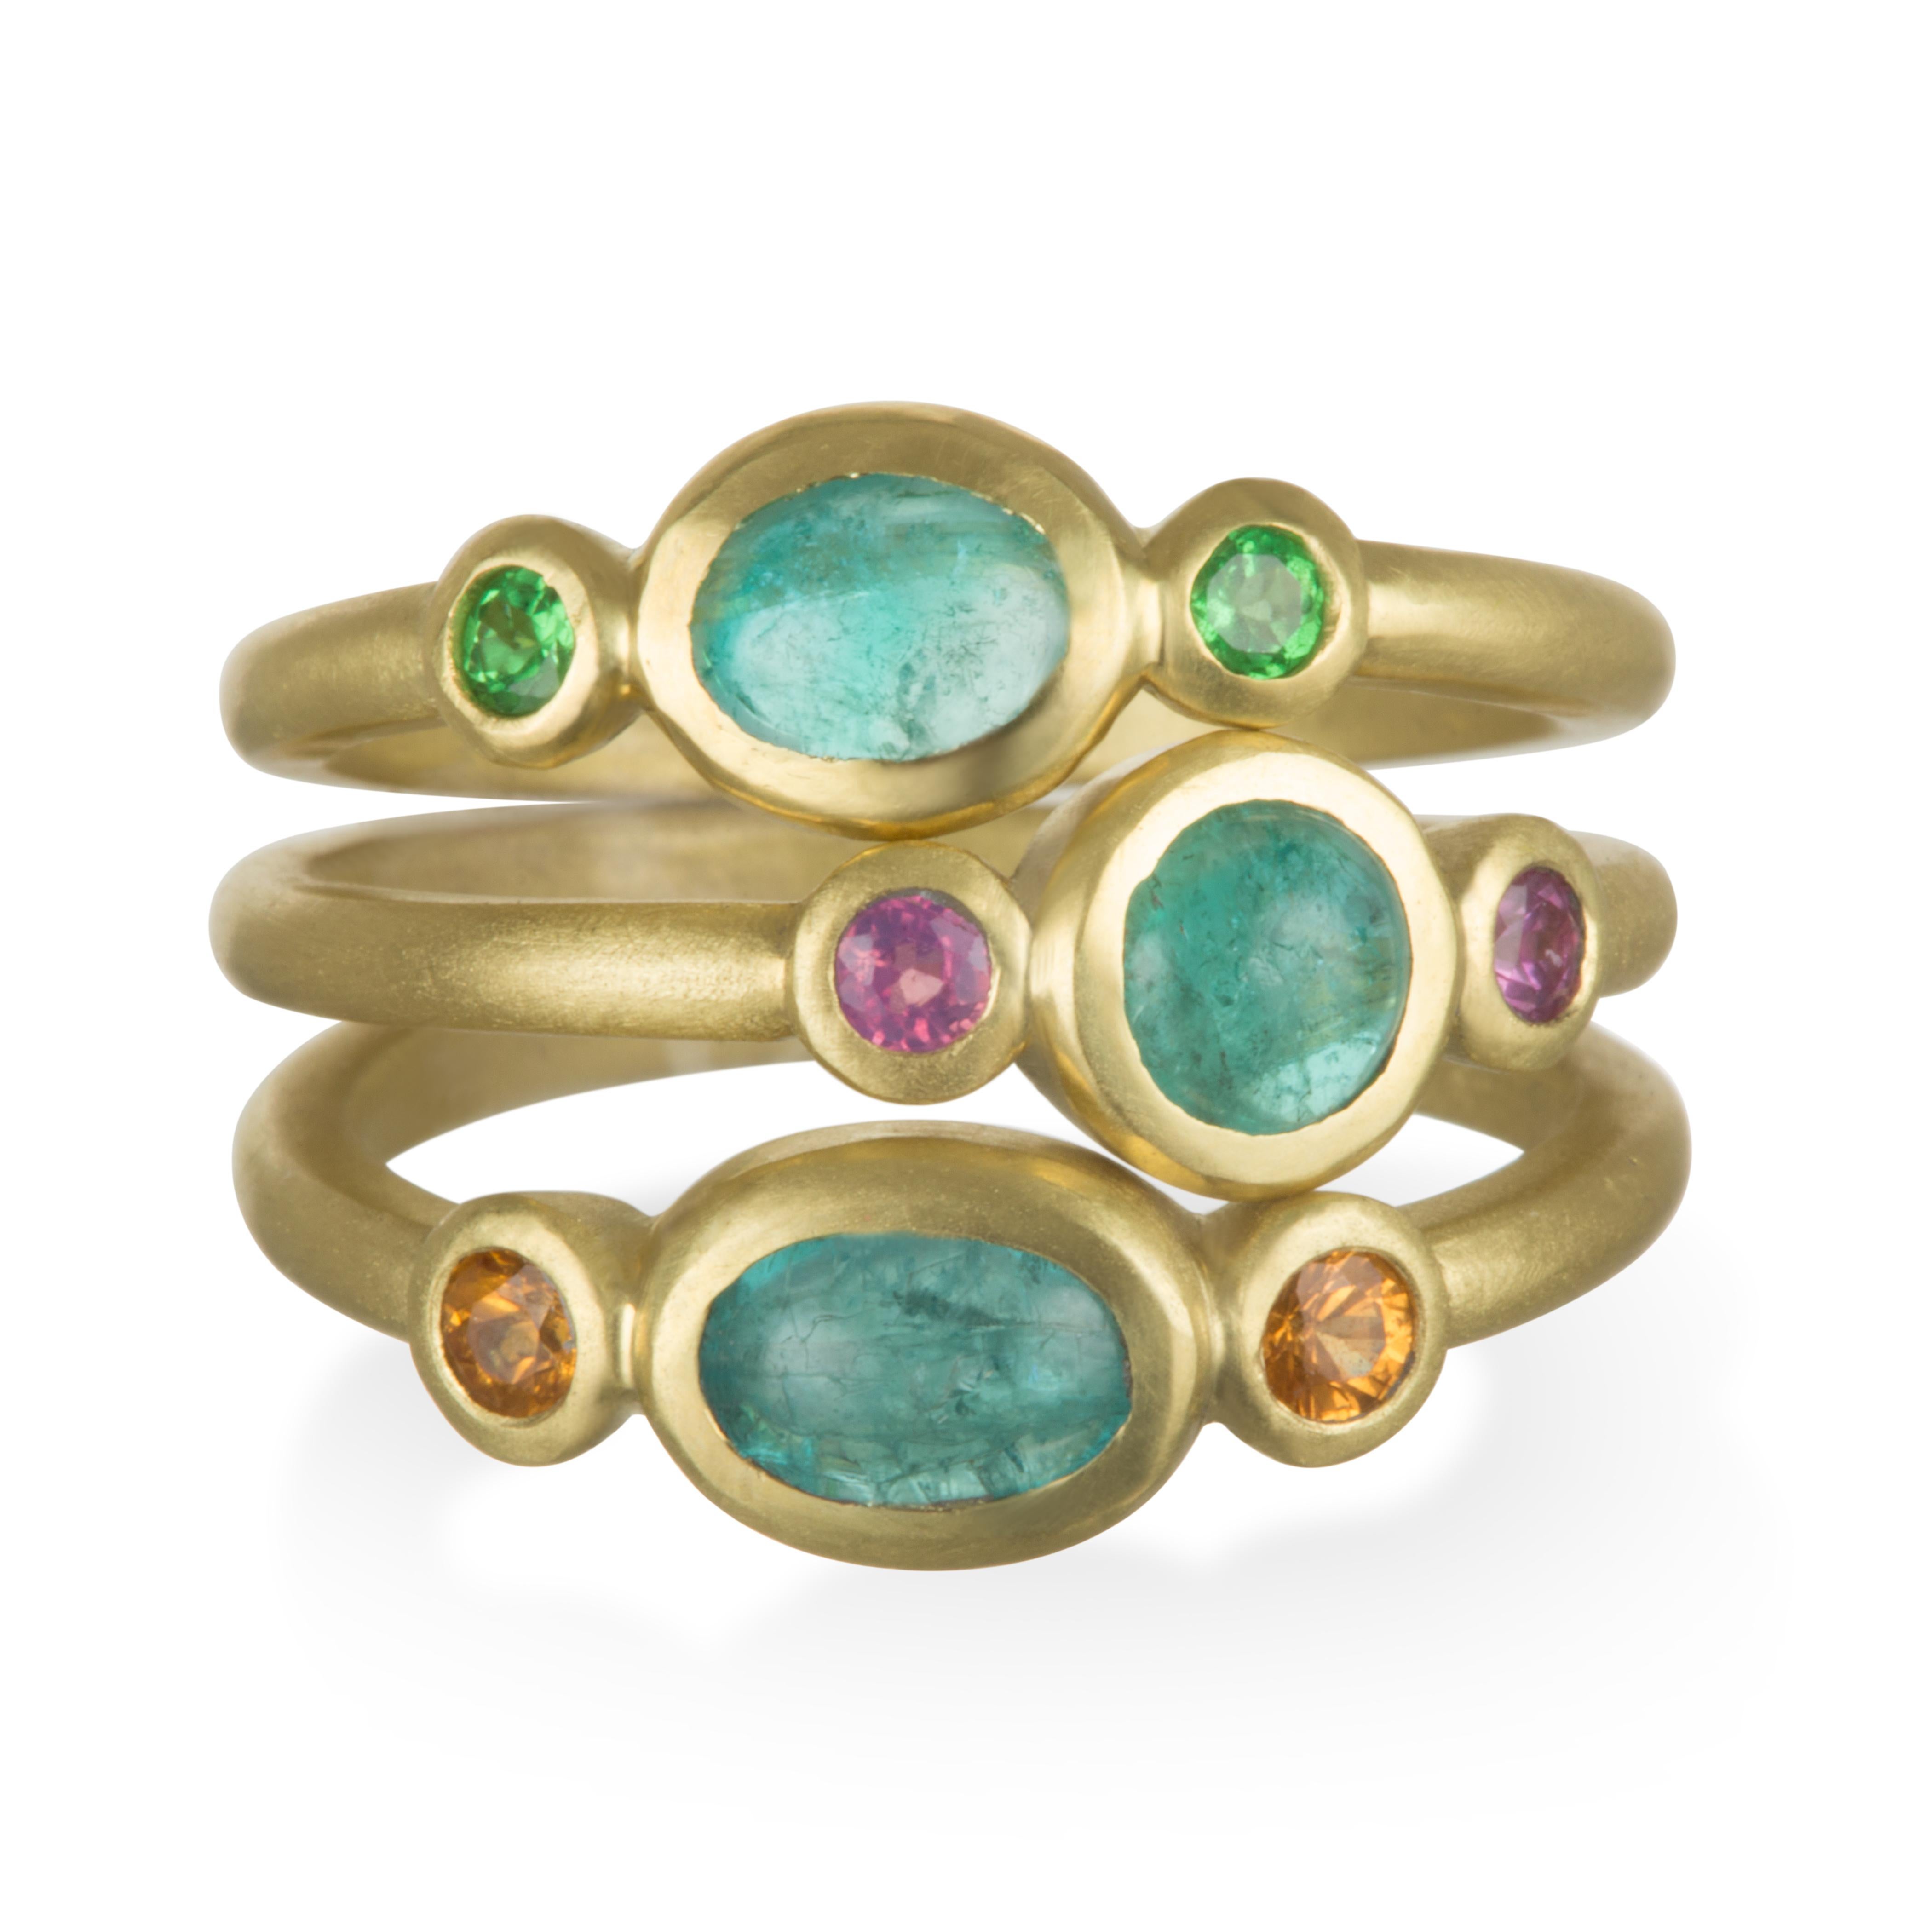 18k Gold Paraiba Tourmaline and Pink Tourmaline Stack Ring.  An explosion of color  - Intense blue-green Paraiba Tourmaline is bezel set with bright Pink Tourmalines.
A nod to nature producing one of the most vivid combinations of colors.  Expert